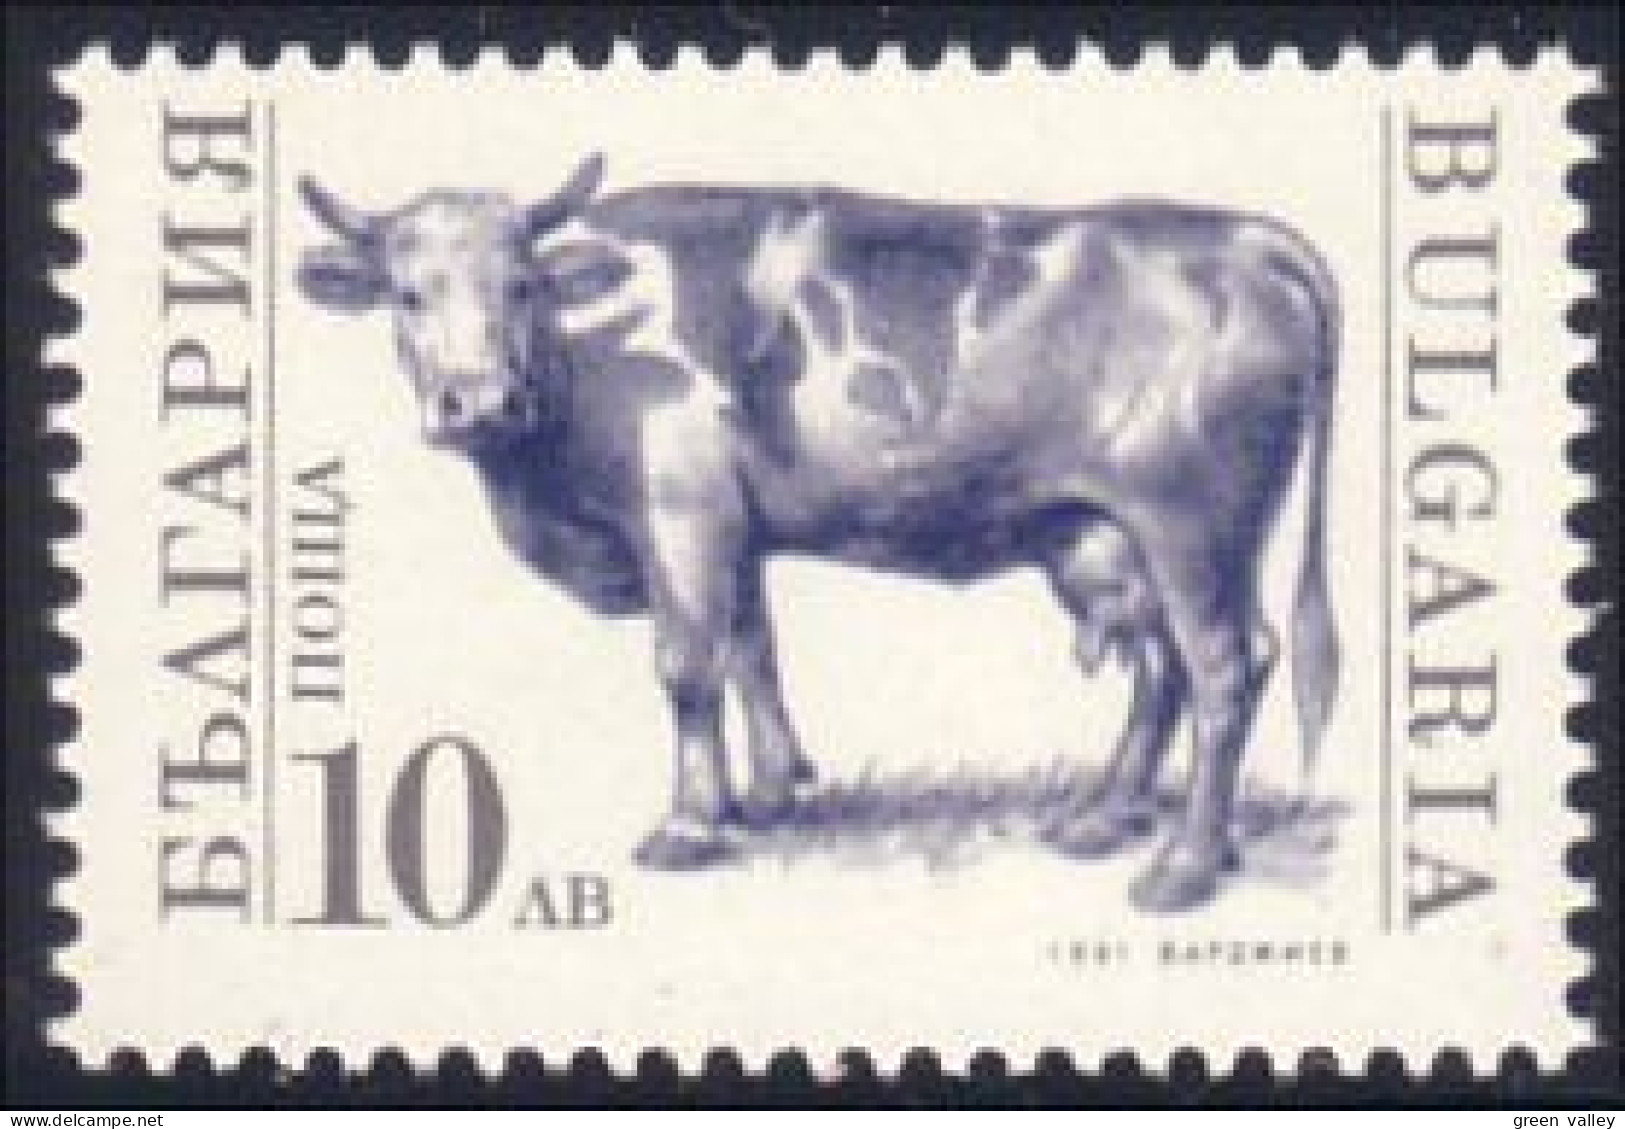 230 Bulgarie Vache Cow Milk Lait Milch Kuh Vacca MNH ** Neuf SC (BUL-47b) - Vaches